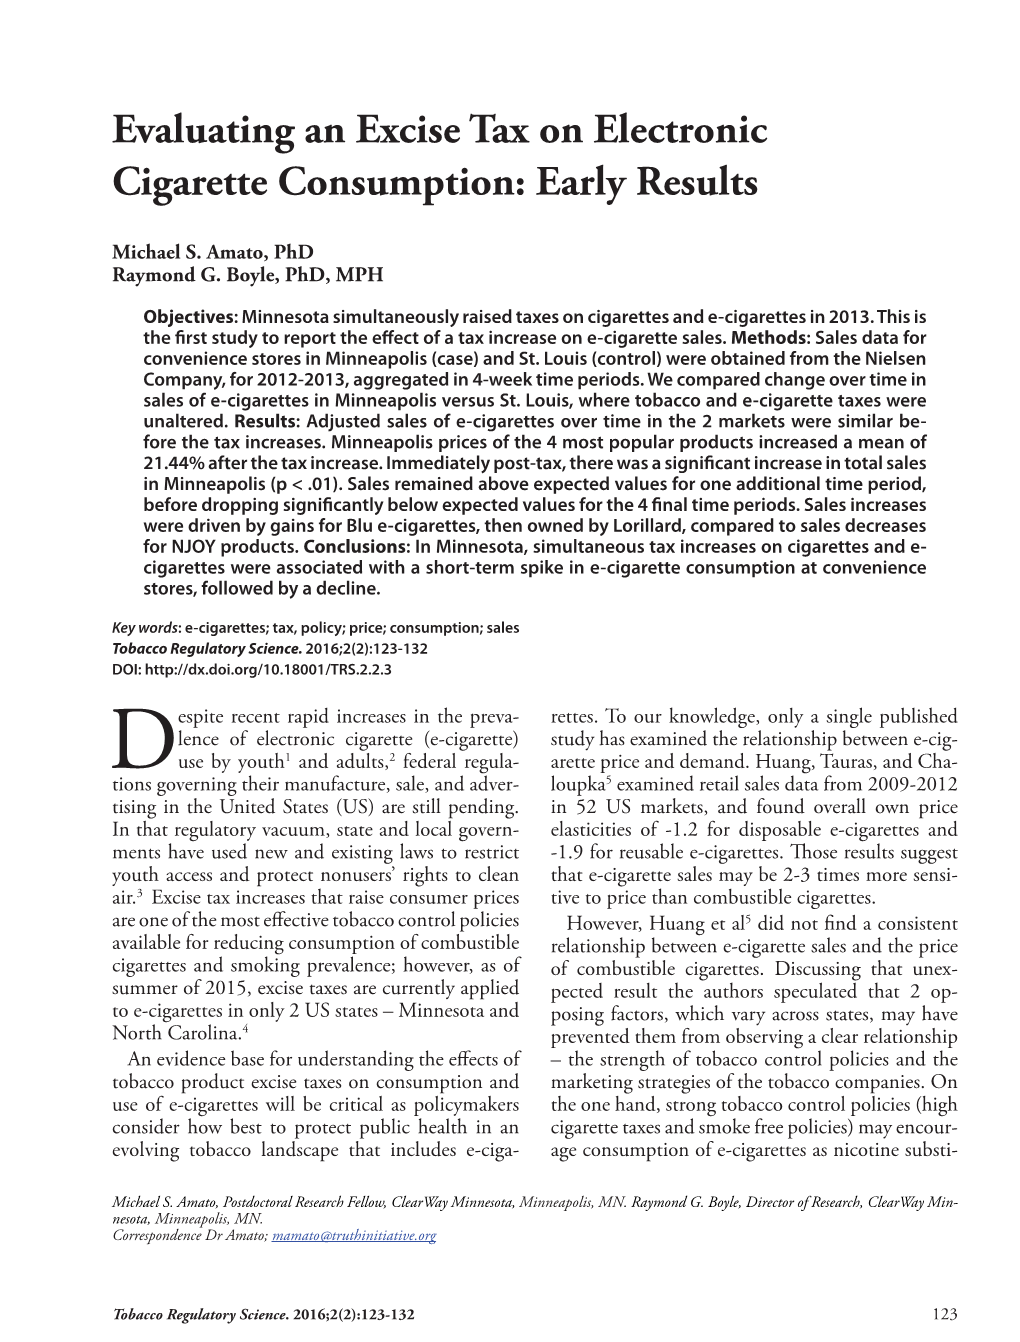 Evaluating an Excise Tax on Electronic Cigarette Consumption: Early Results